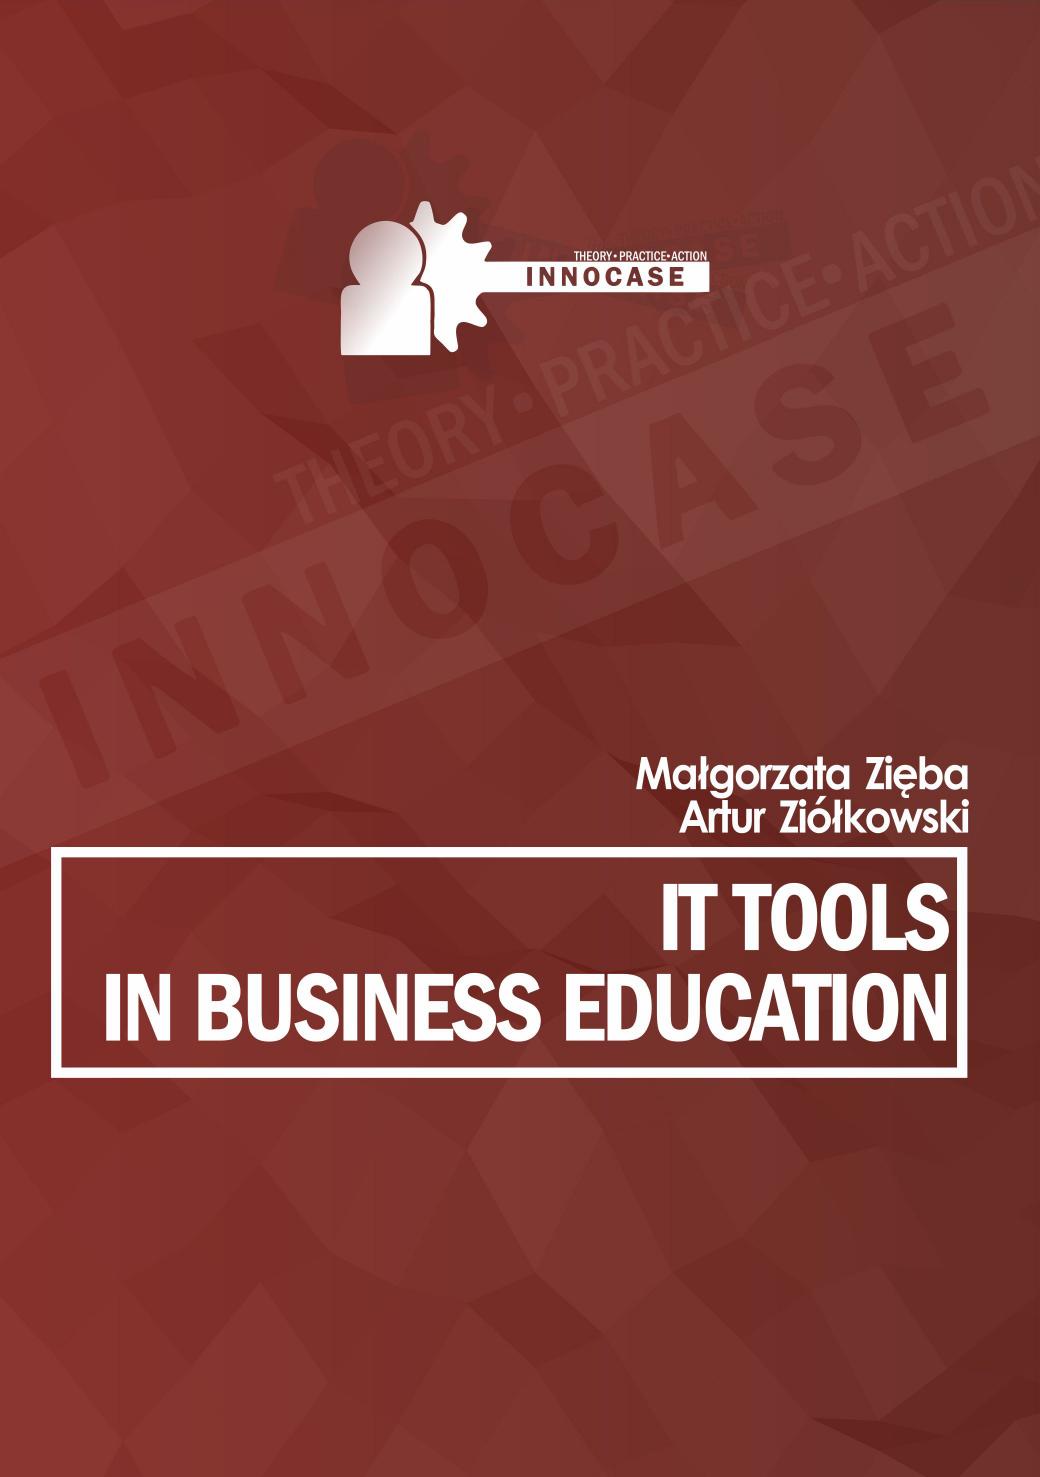 IT tools in business education